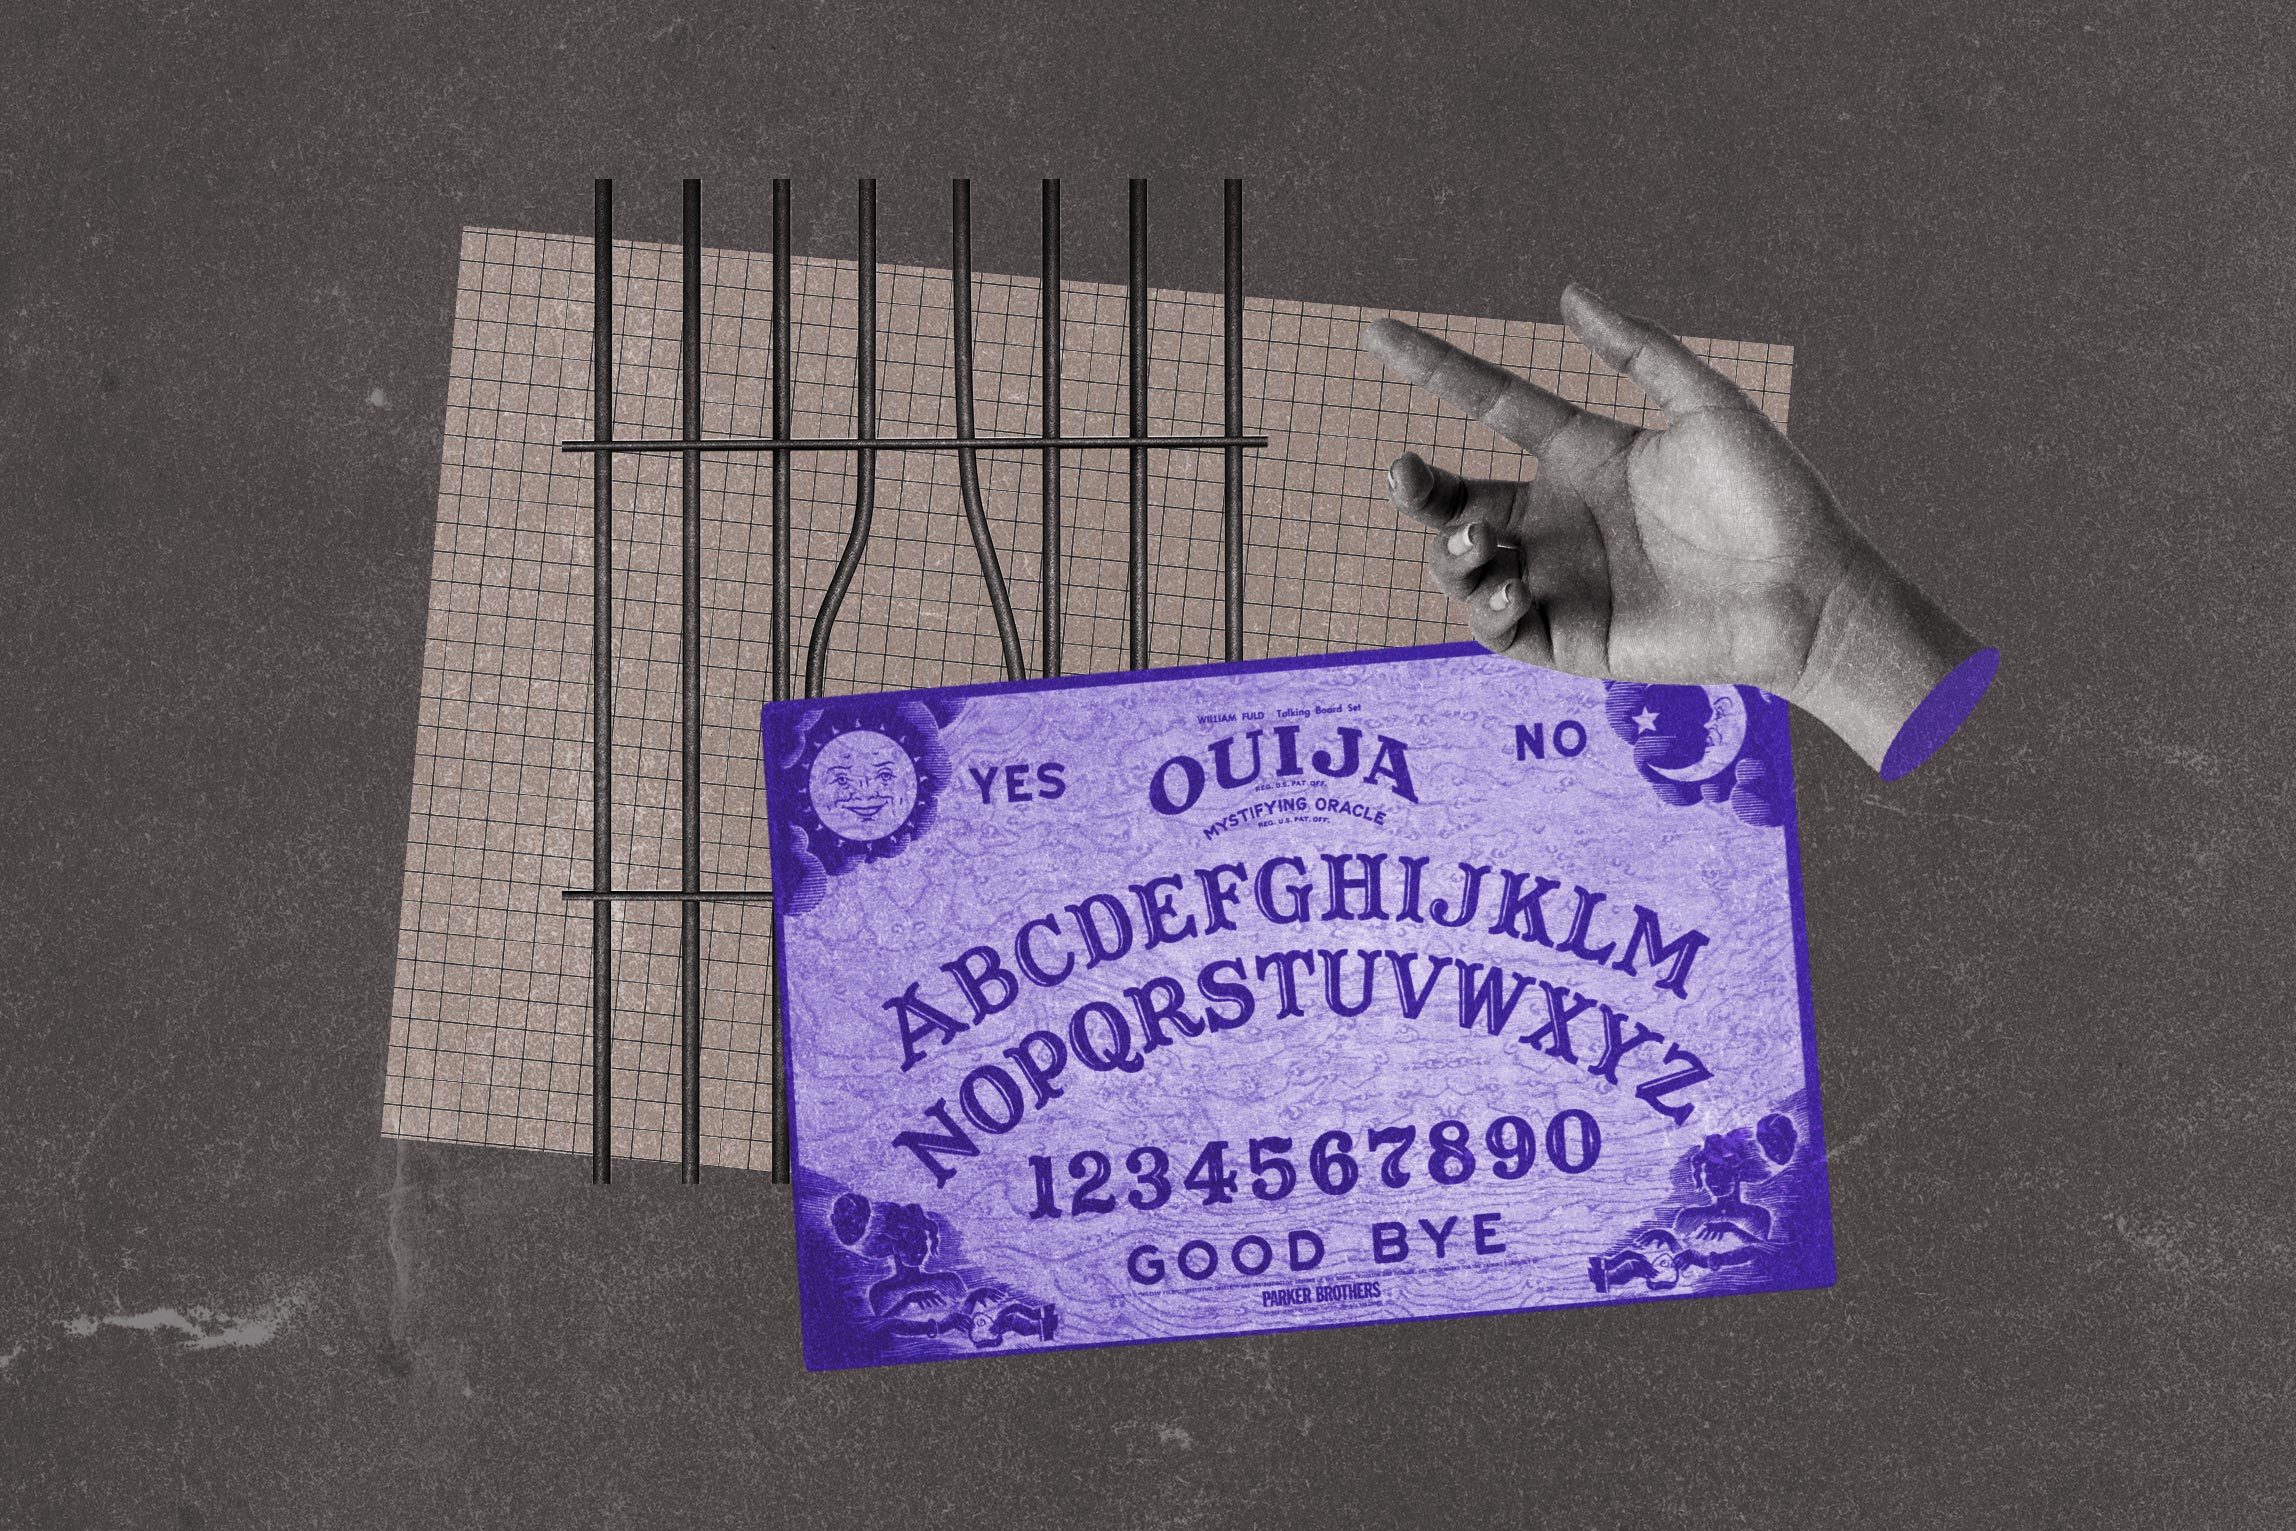 Collage of prison bars and ouija board